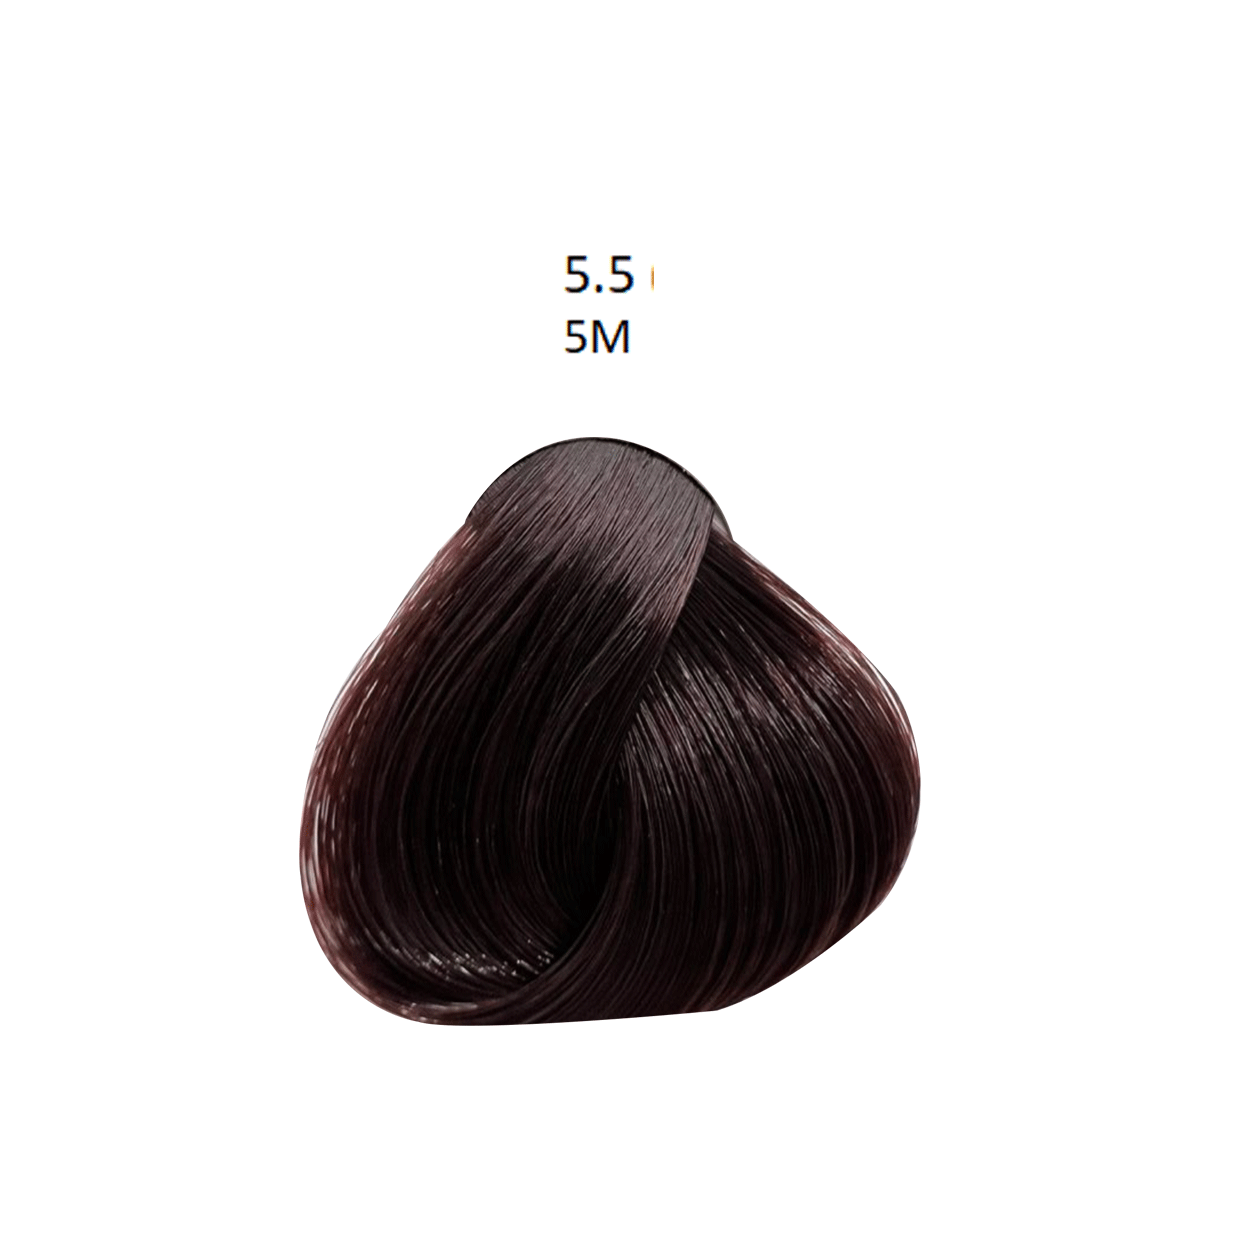 Virtuous Color - Permanent Coloring System 5.5 (Mahogany - 5M)